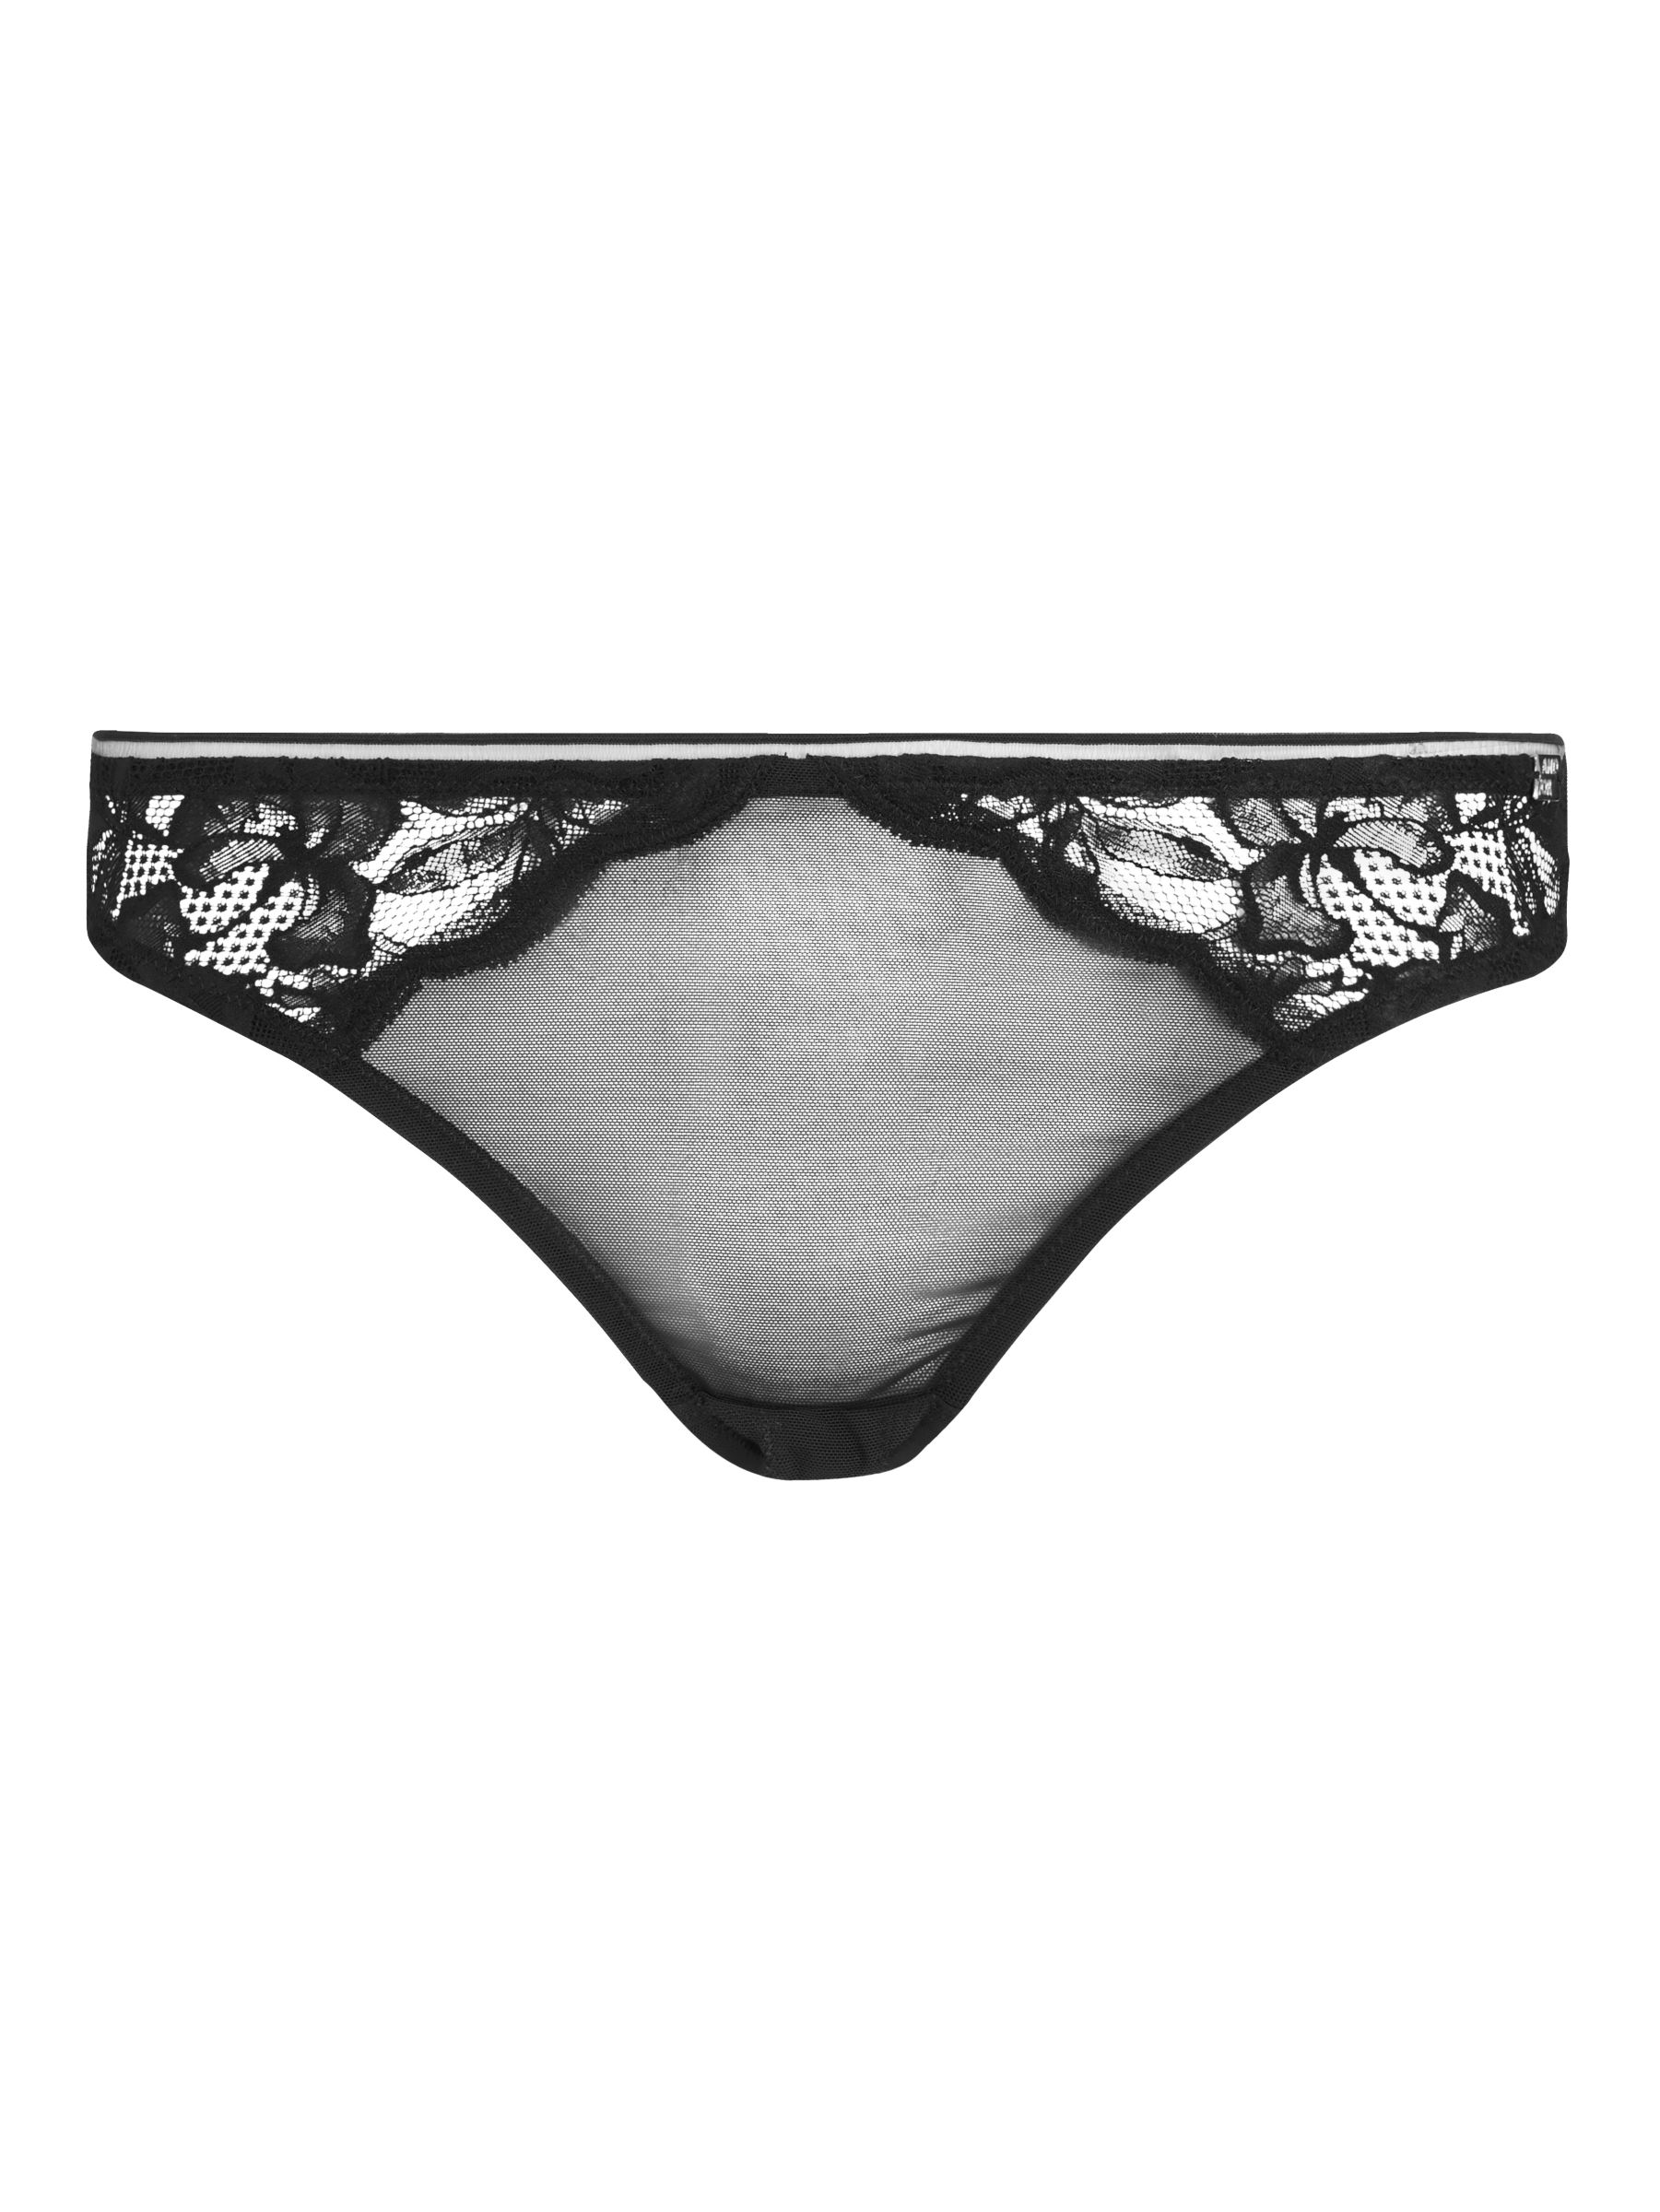 AND/OR Wren Lace Brazilian Knickers, Black, 8